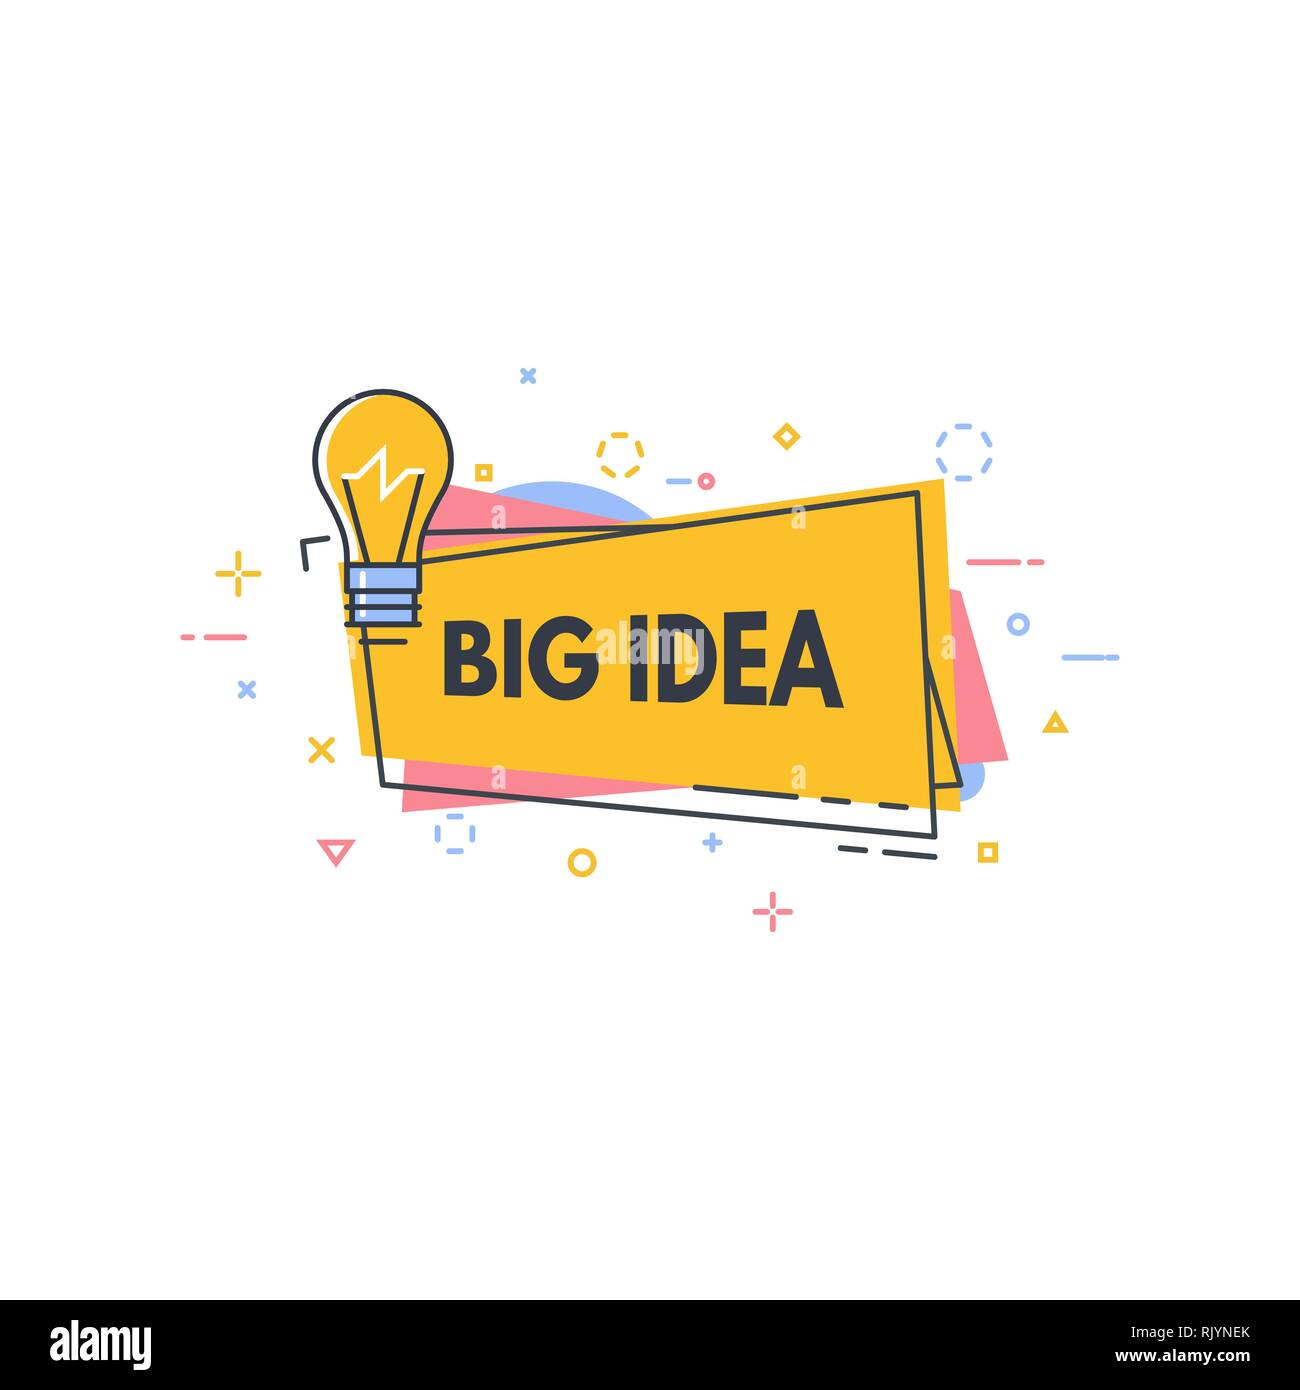 Big idea line style banner. Good idea or quick tip speech bubble. Consultant badge with text. Creativity and innovations line style concept. Stock Vector